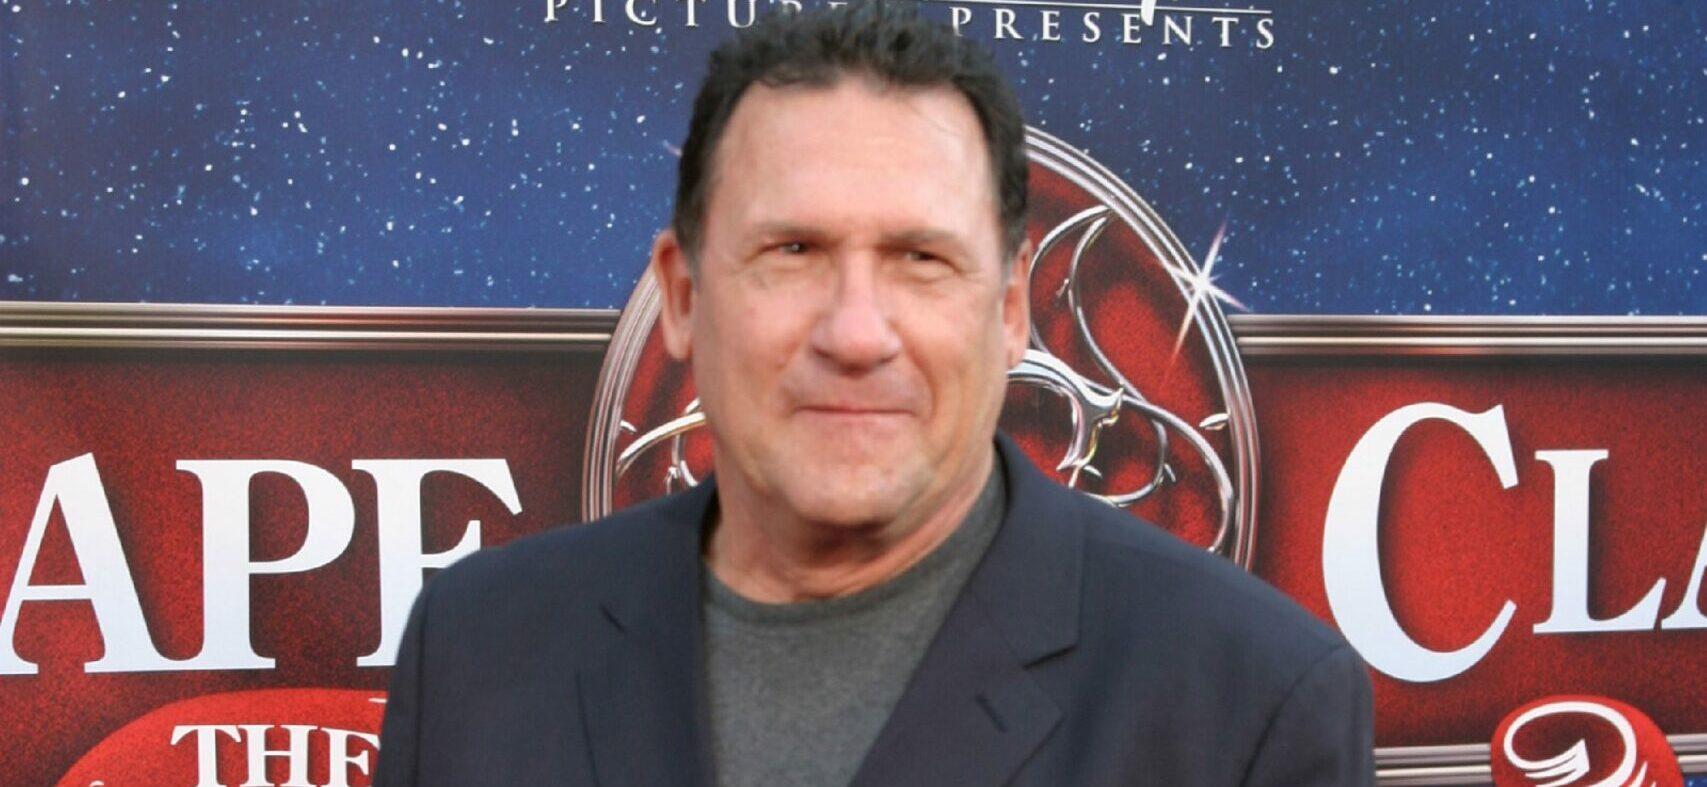 Art LaFleur at The Los Angeles Premiere of The Santa Clause 3: The Escape Clause held at El Capitan Theater Hollywood, USA